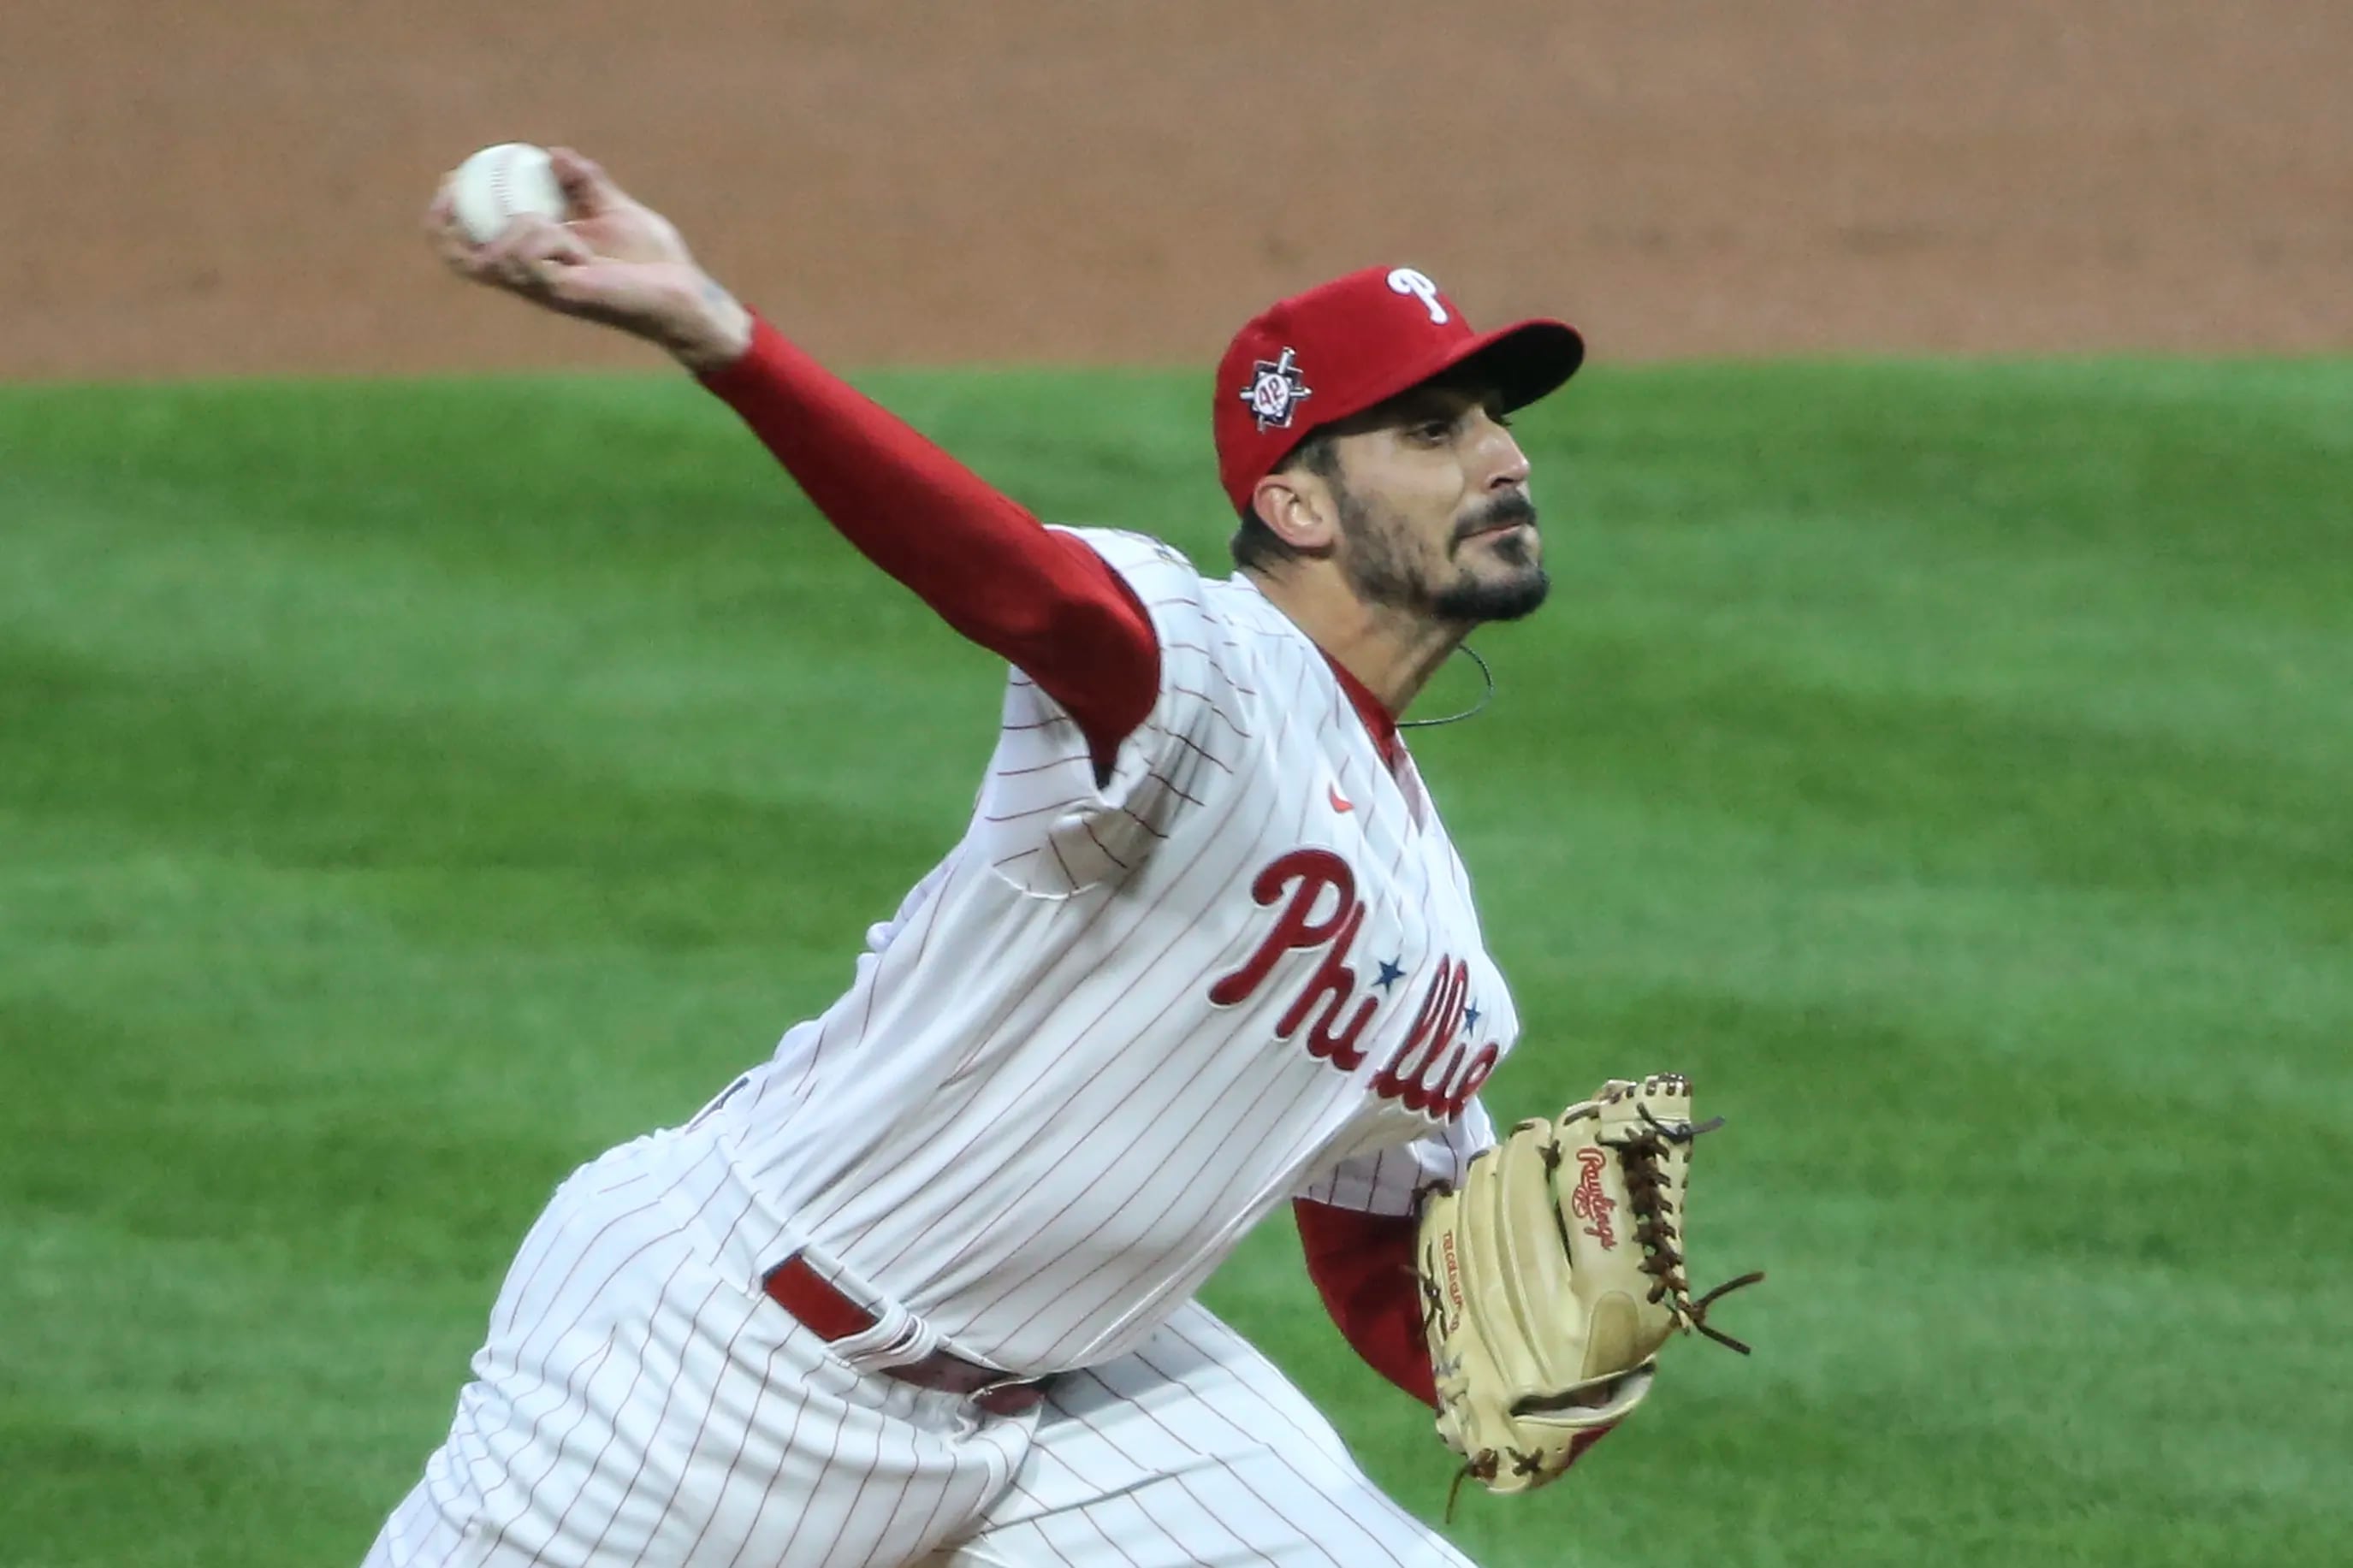 Pictures from the Phillies' 9-2 win over the Cardinals